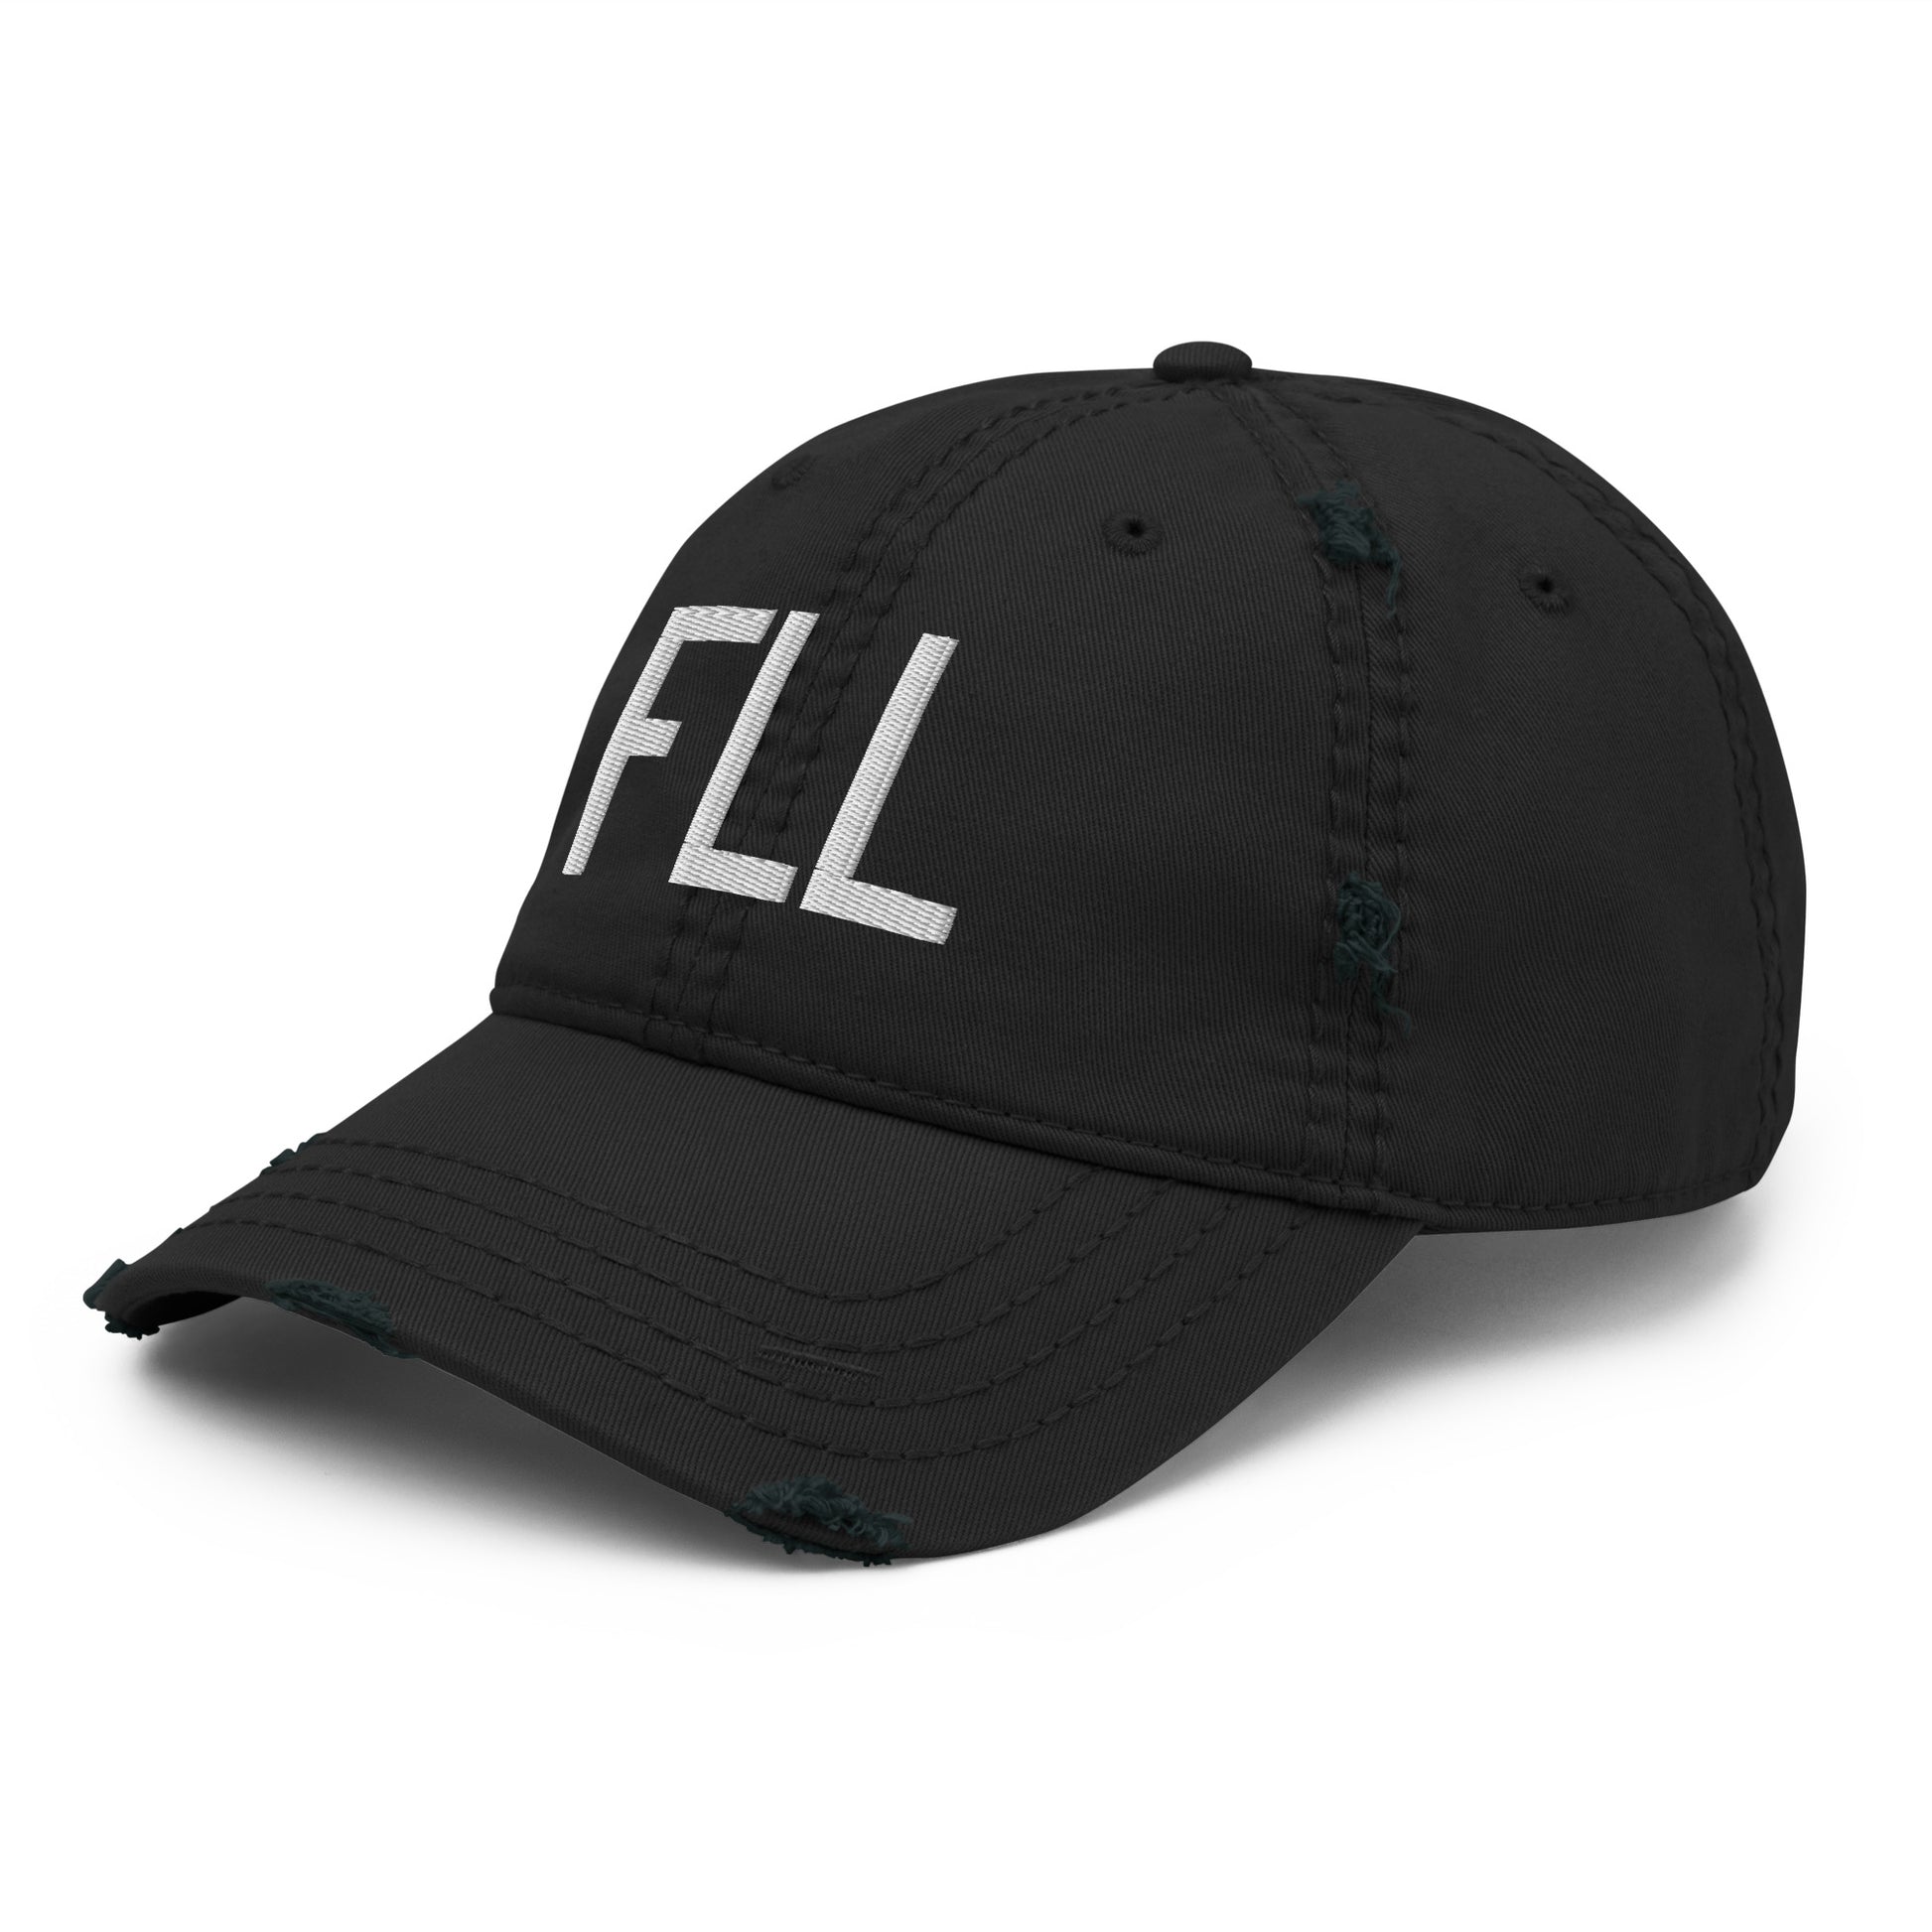 Airport Code Distressed Hat - White • FLL Fort Lauderdale • YHM Designs - Image 11